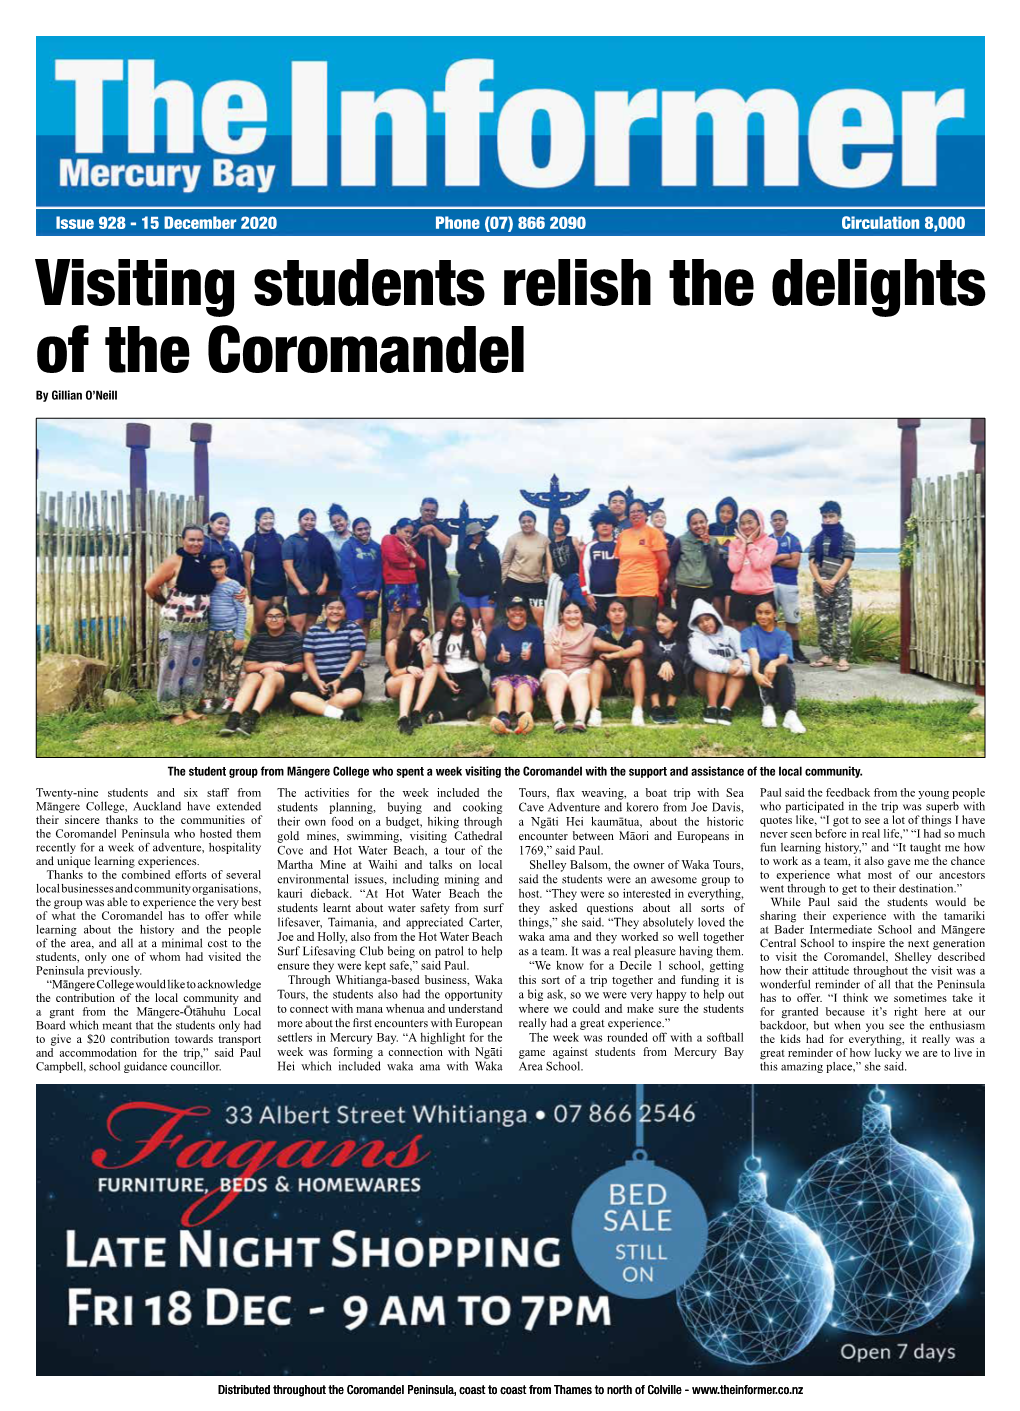 Visiting Students Relish the Delights of the Coromandel by Gillian O’Neill